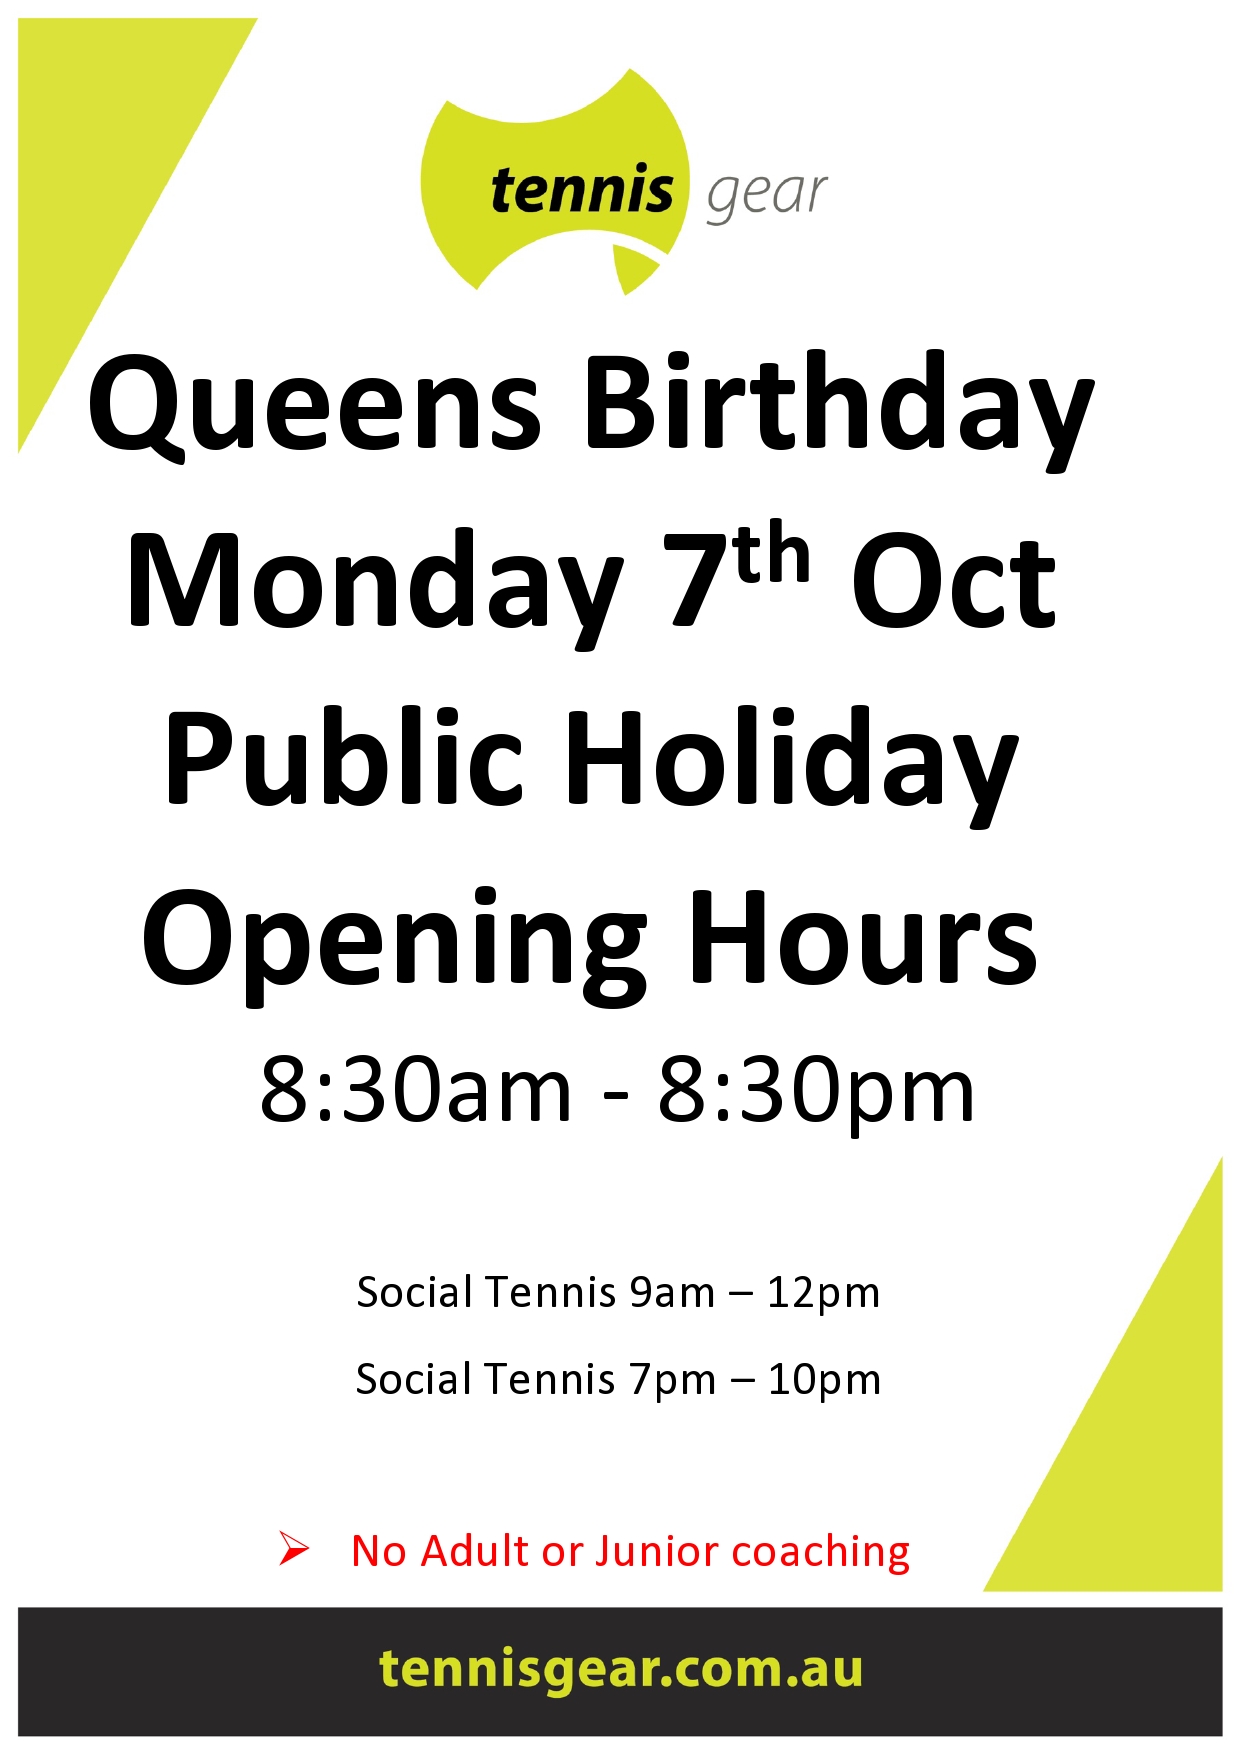 Queens Birthday Monday 7th Oct Public Holiday Opening Hours